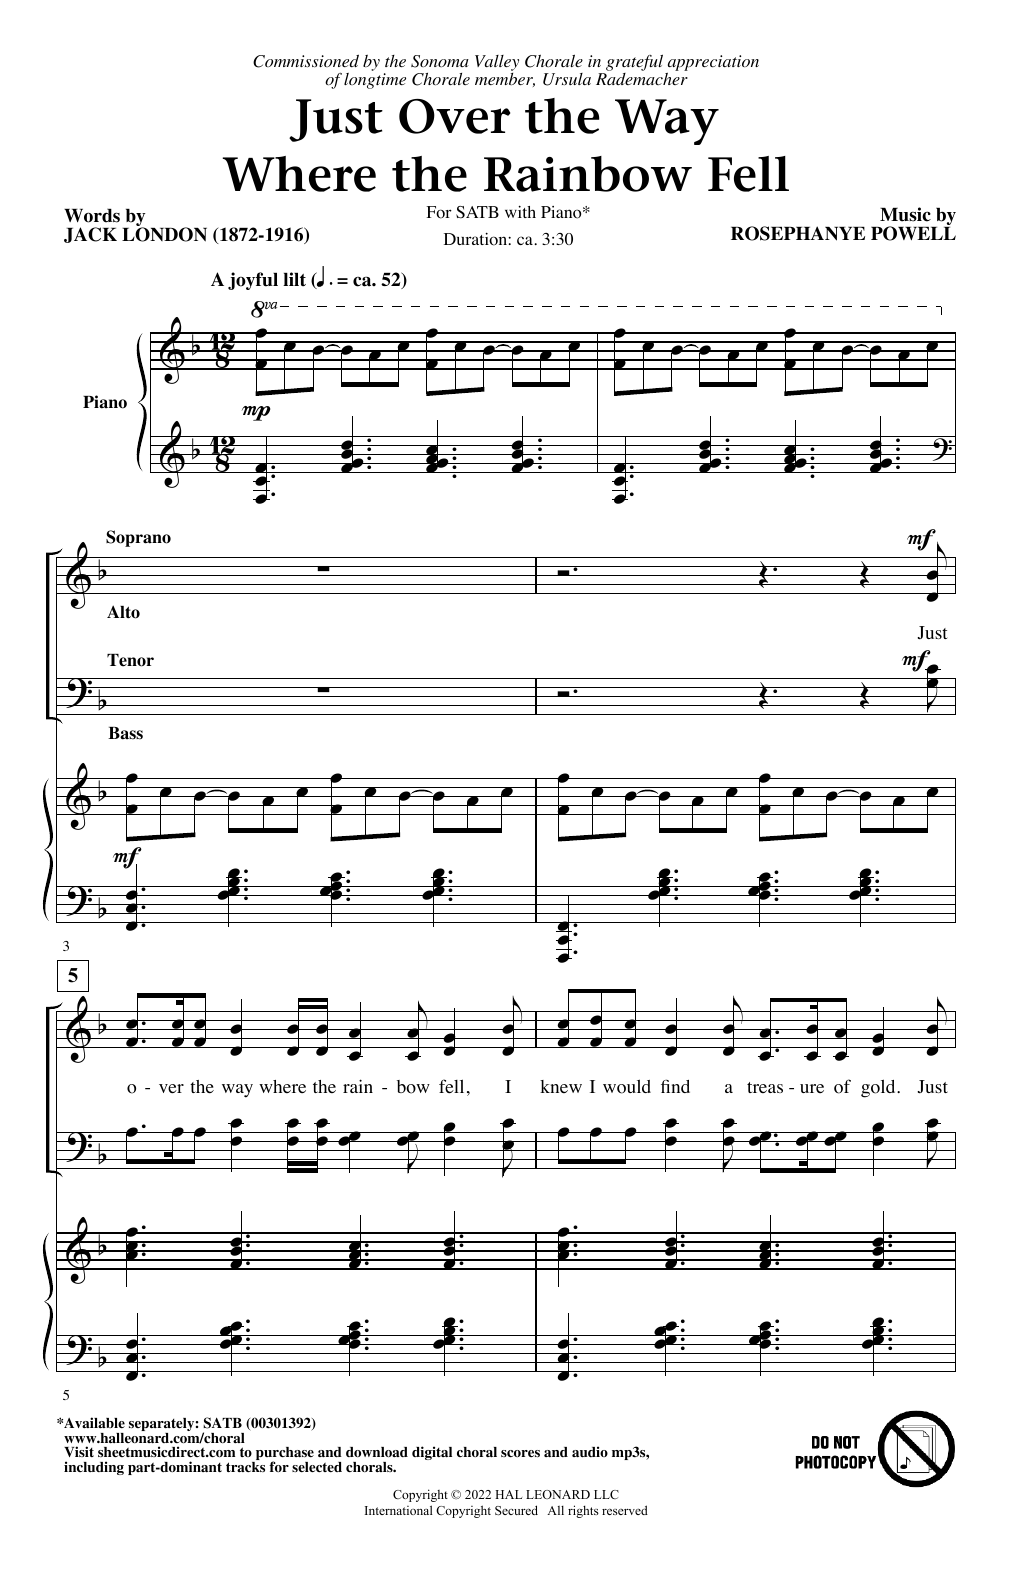 Download Jack London and Rosephanye Powell Just Over The Way Where The Rainbow Fel Sheet Music